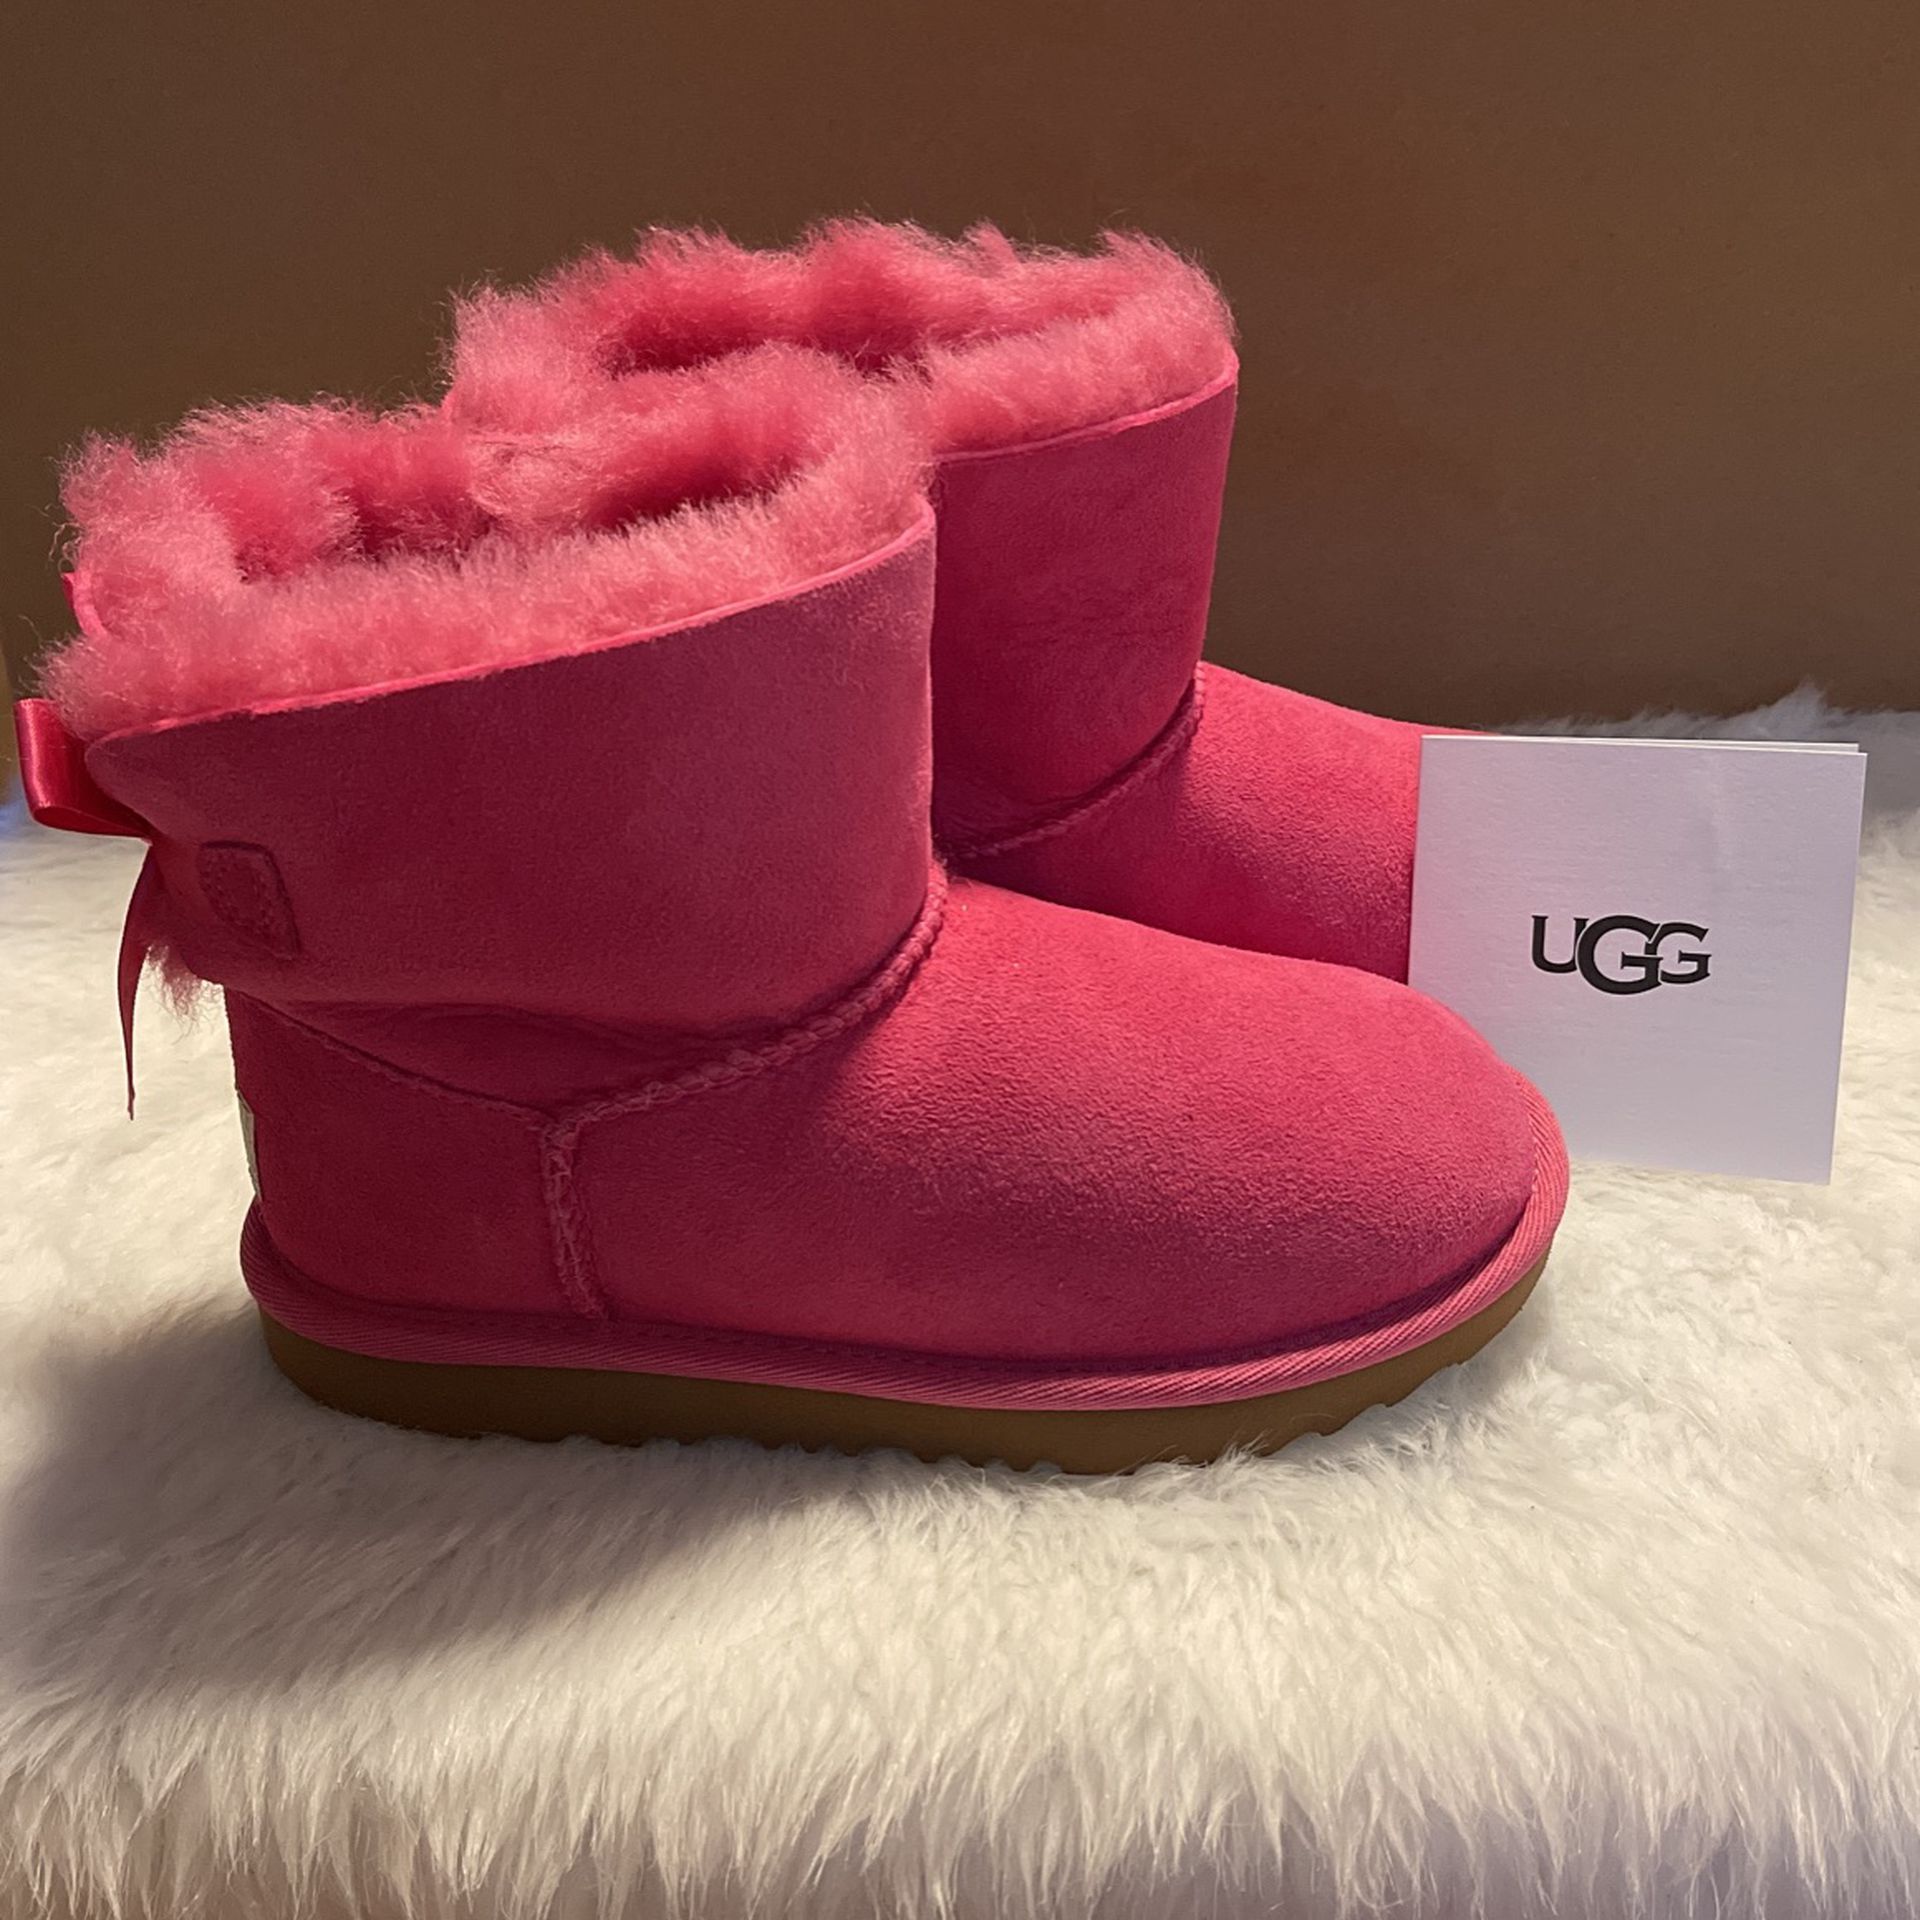 GIRLS SIZE 1 UGG BOOTS